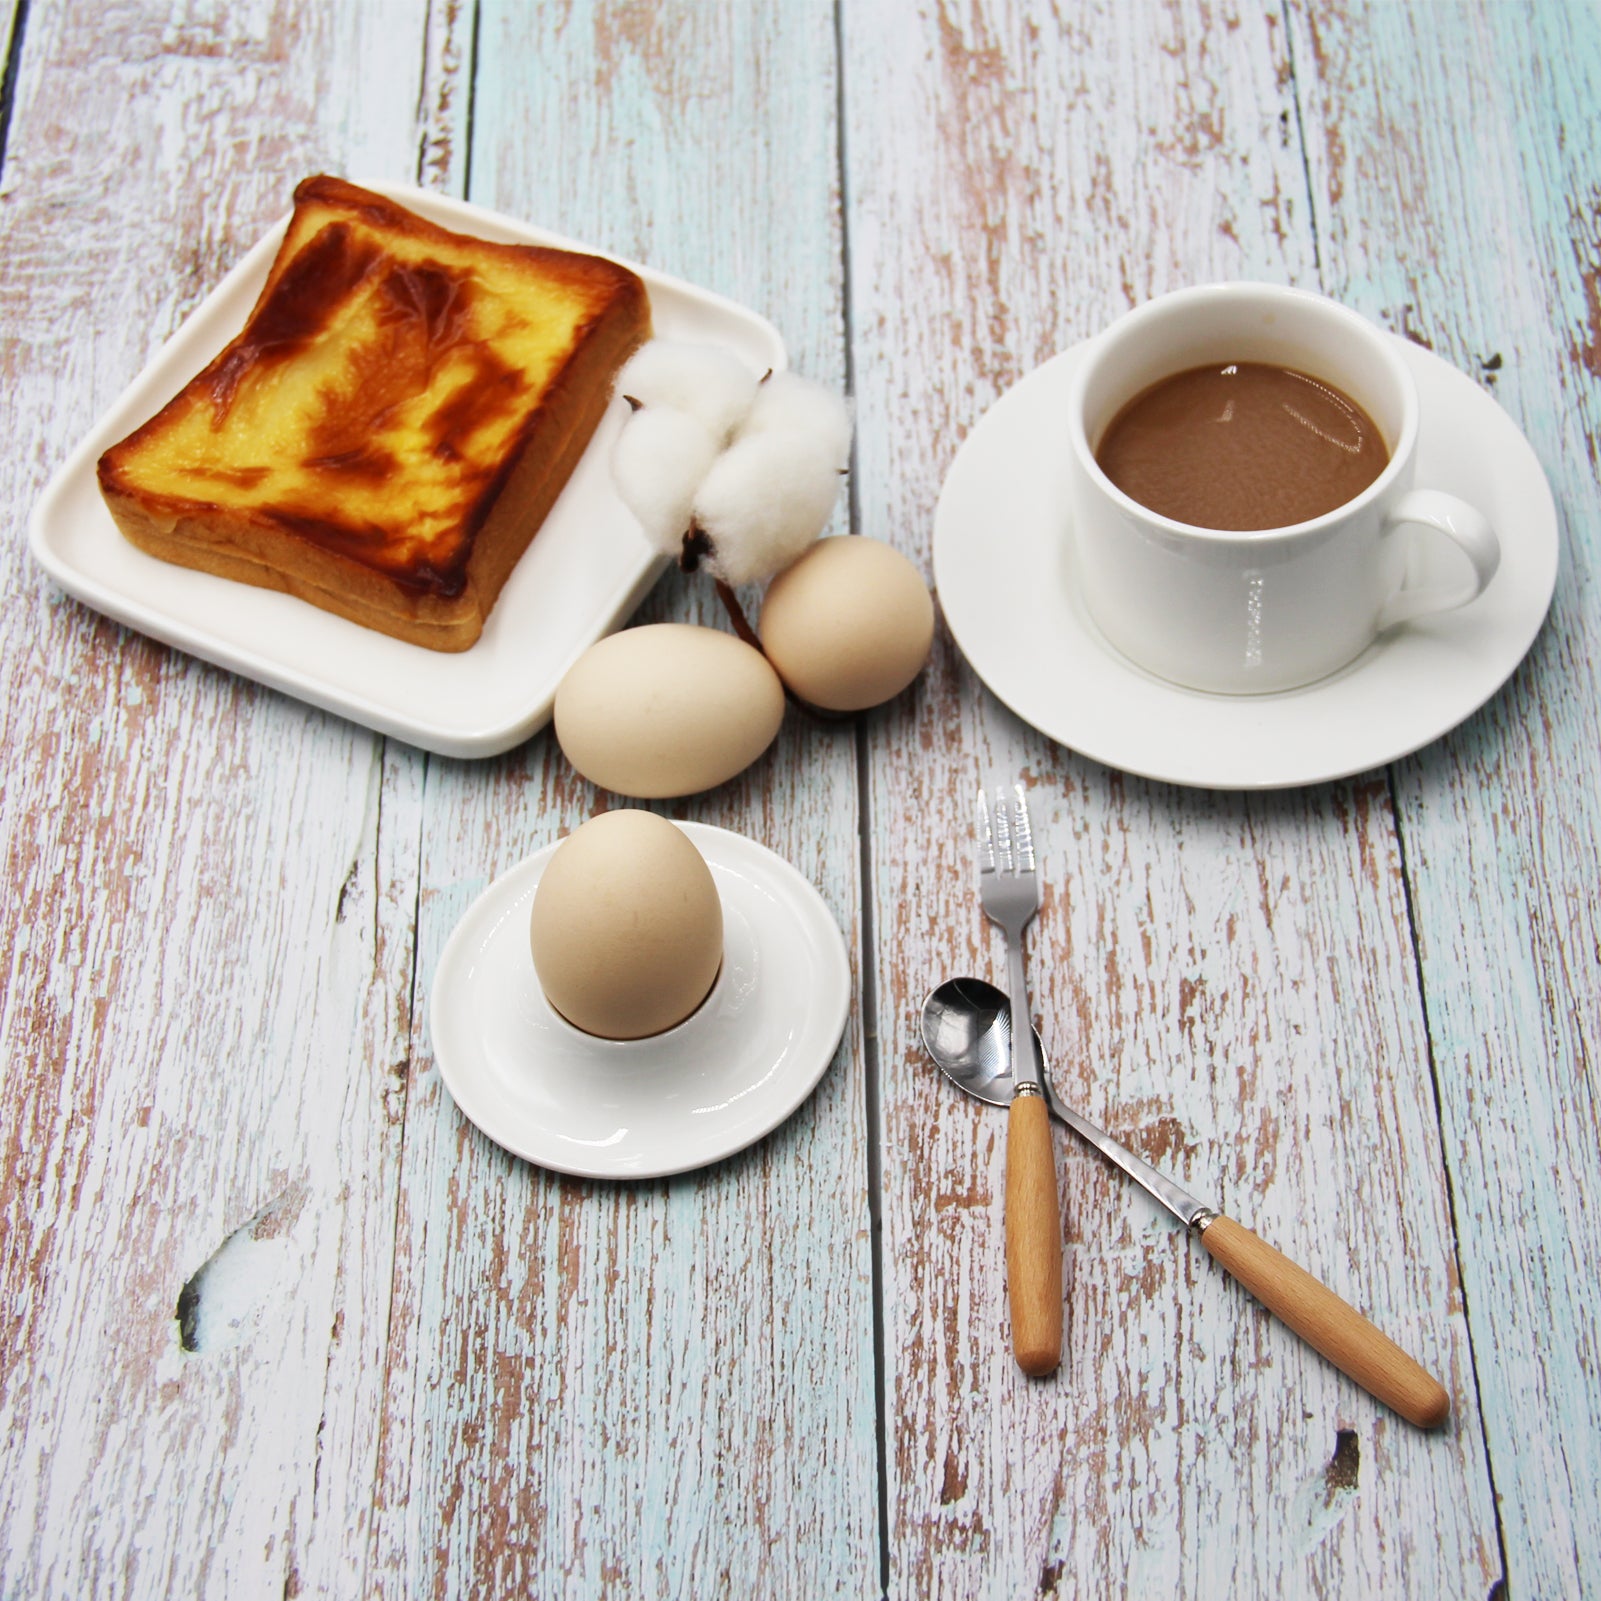 Kitchenware/Dining - Single - Egg Cup/Holder - EGG OF THRONES